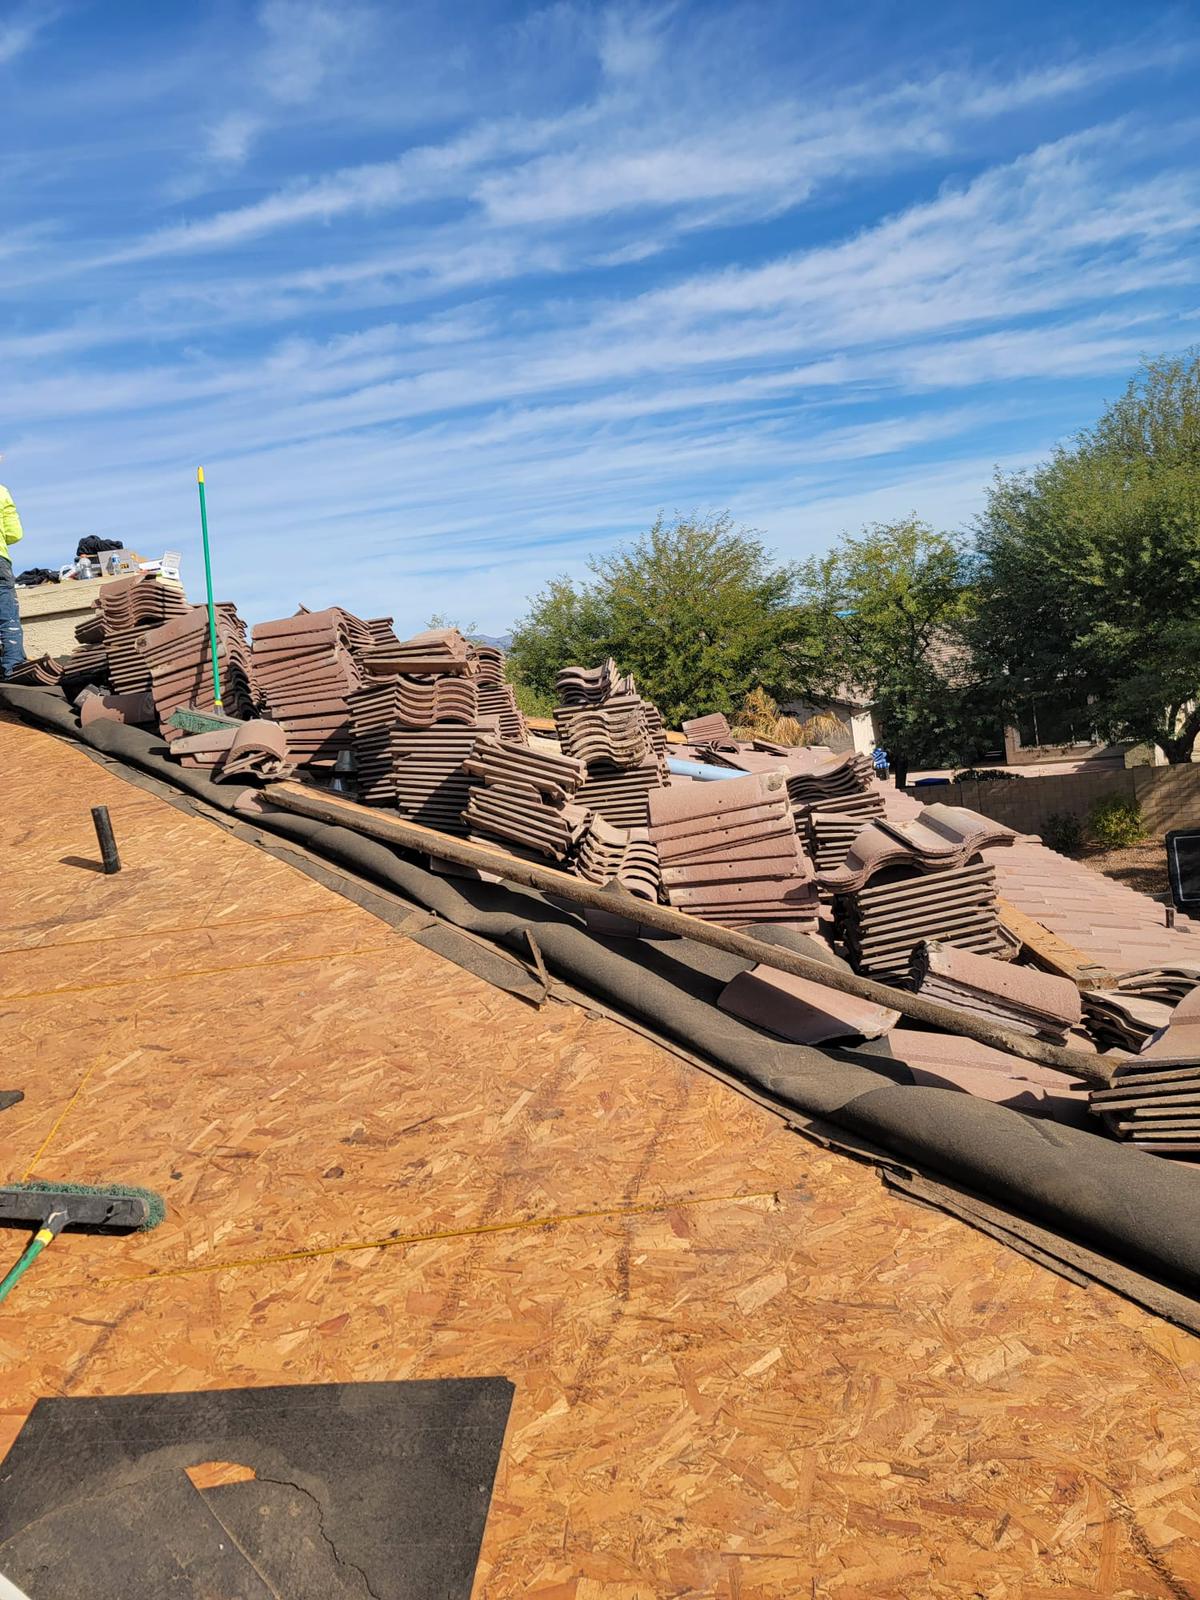 Overview of a Phoenix home mid-renovation, featuring piles of neatly stacked tiles ready for a Behmer re-felt service, against a backdrop of a clear blue sky.